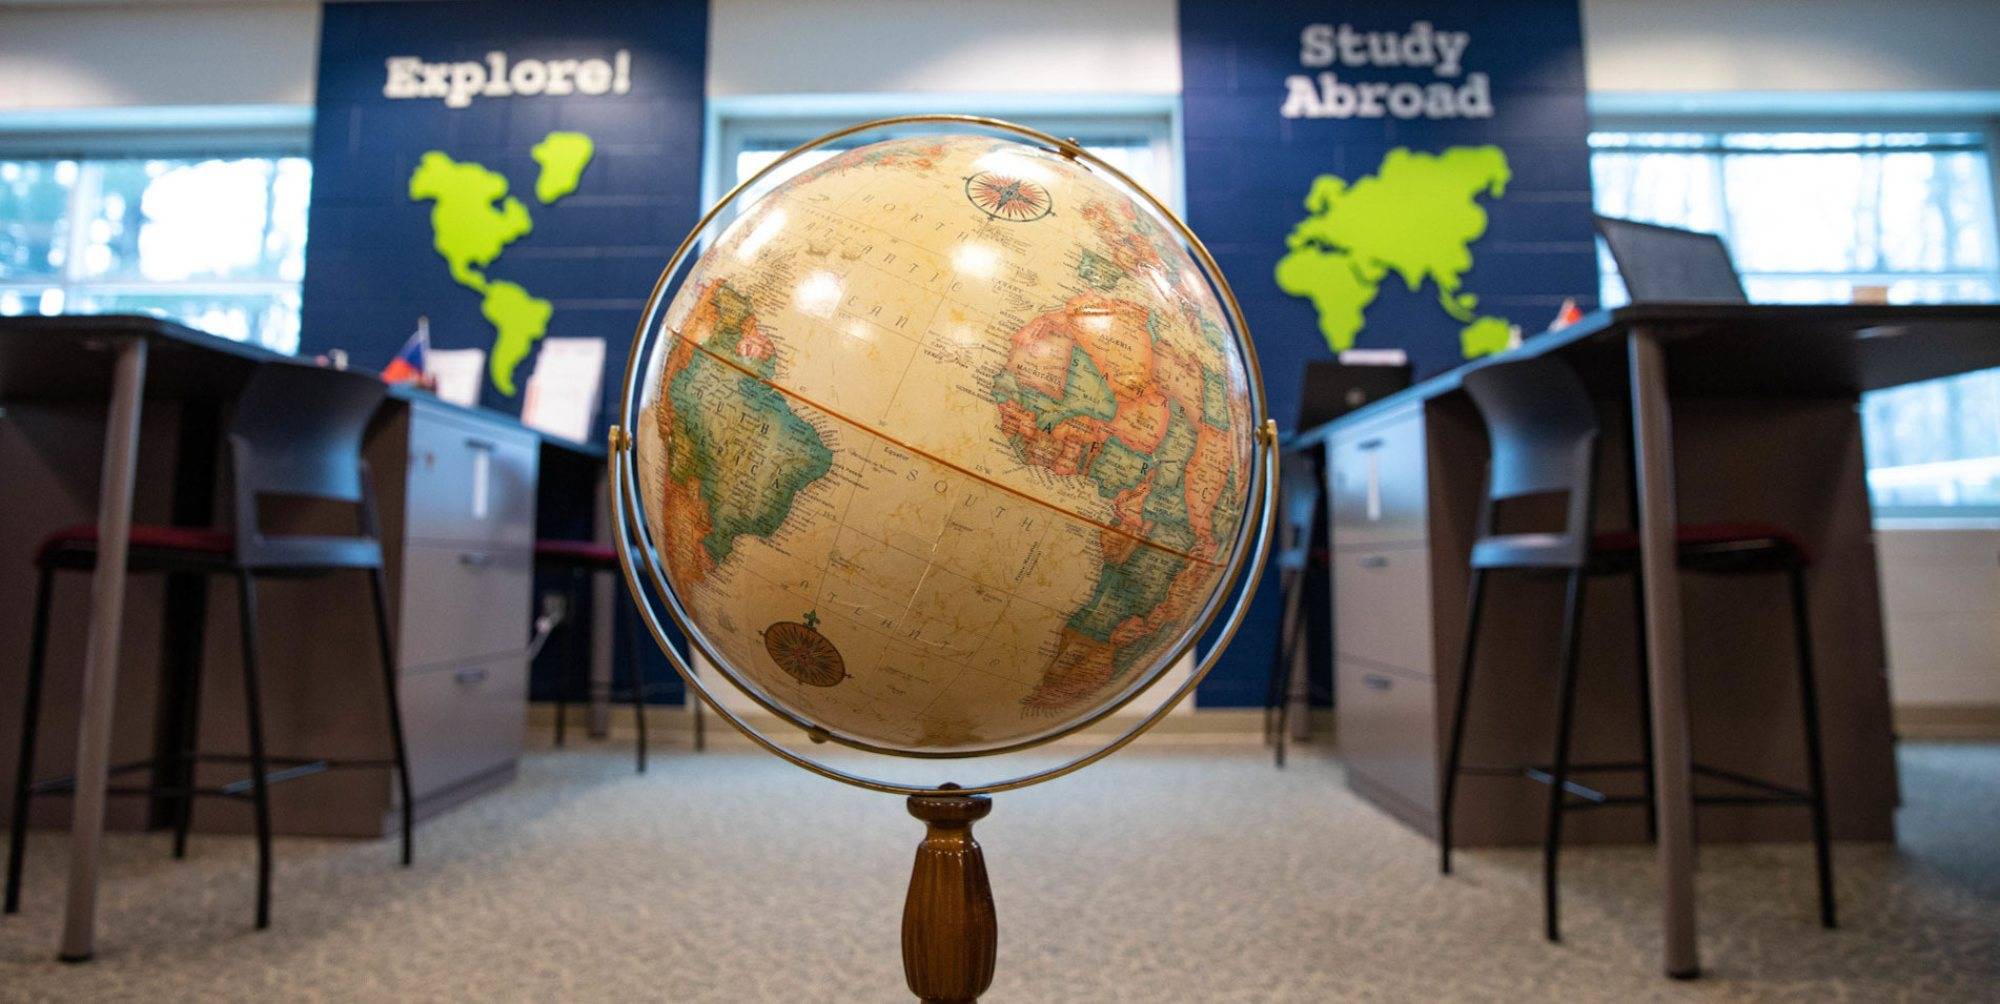 A globe in the Padnos International Center is pictured; winter semester study abroad programs have been suspended.